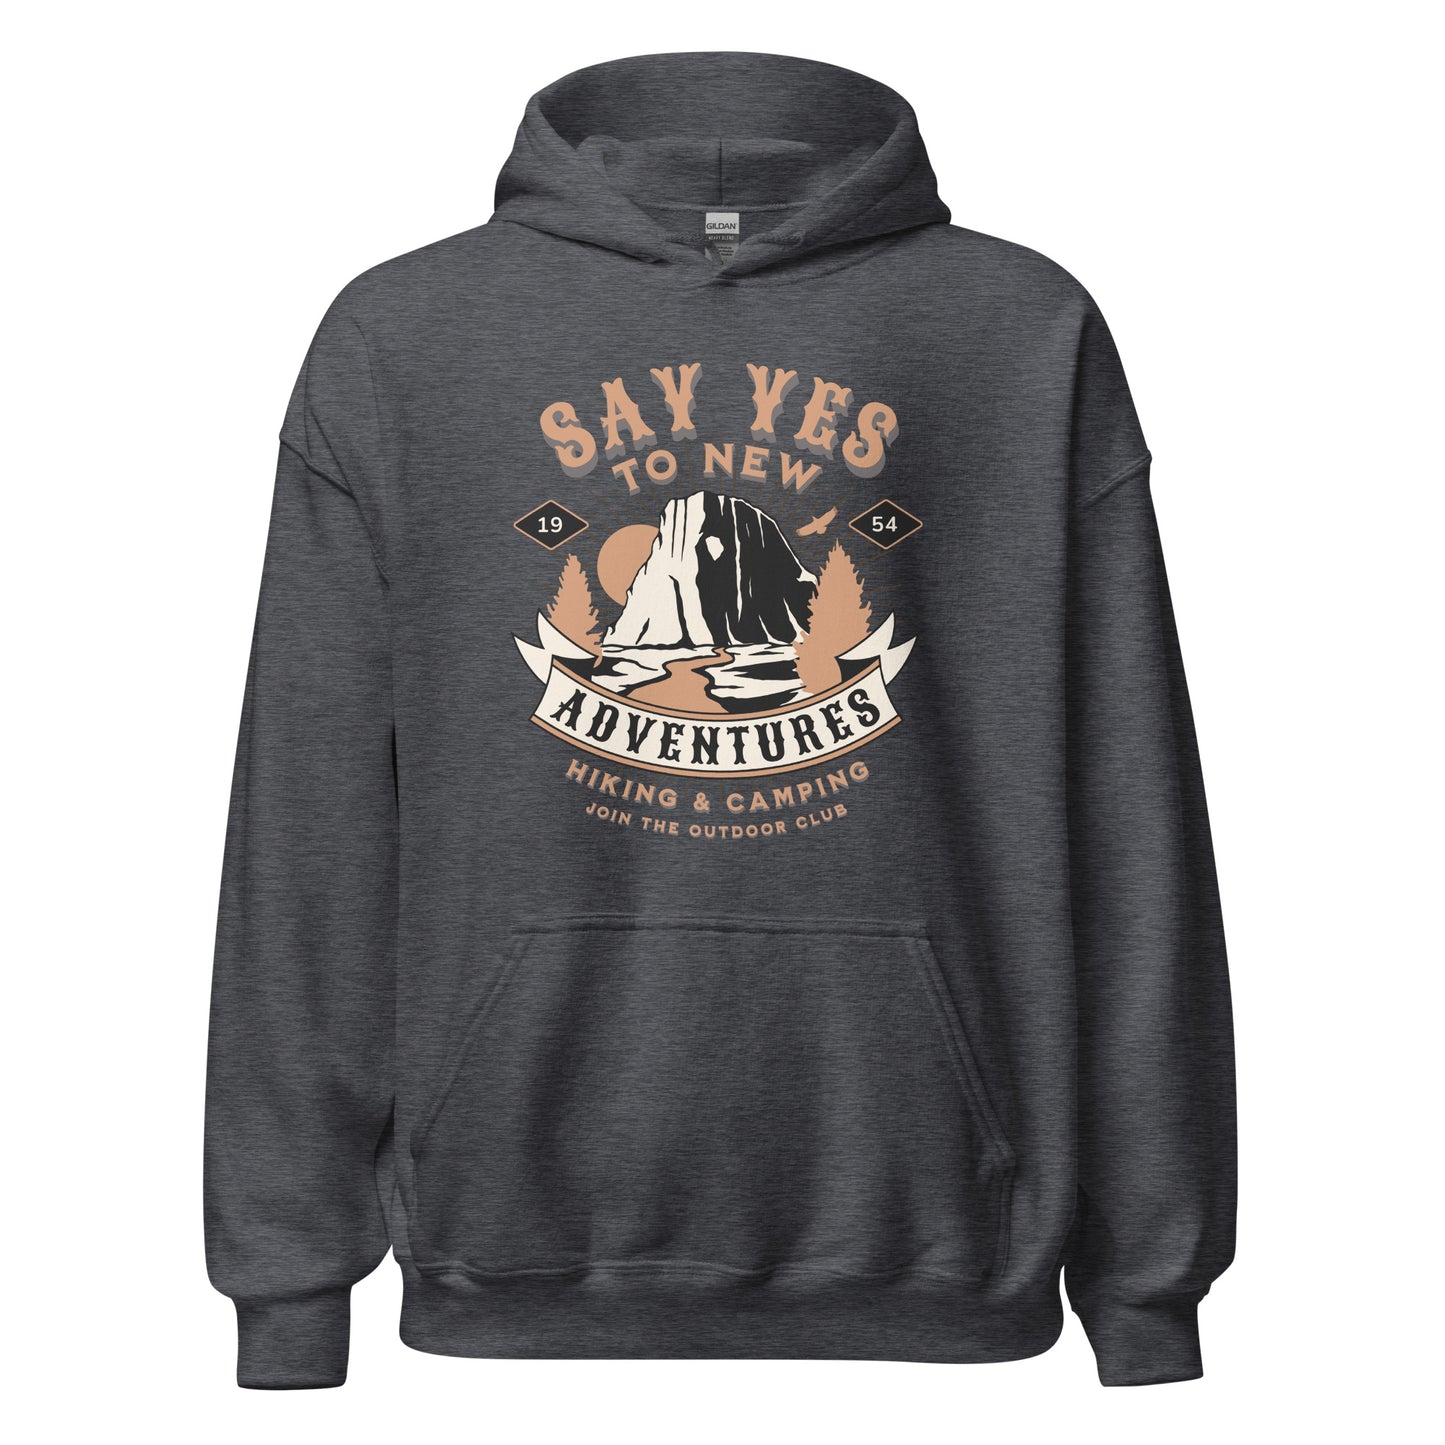 Say Yes to New Adventures Unisex Hoodie